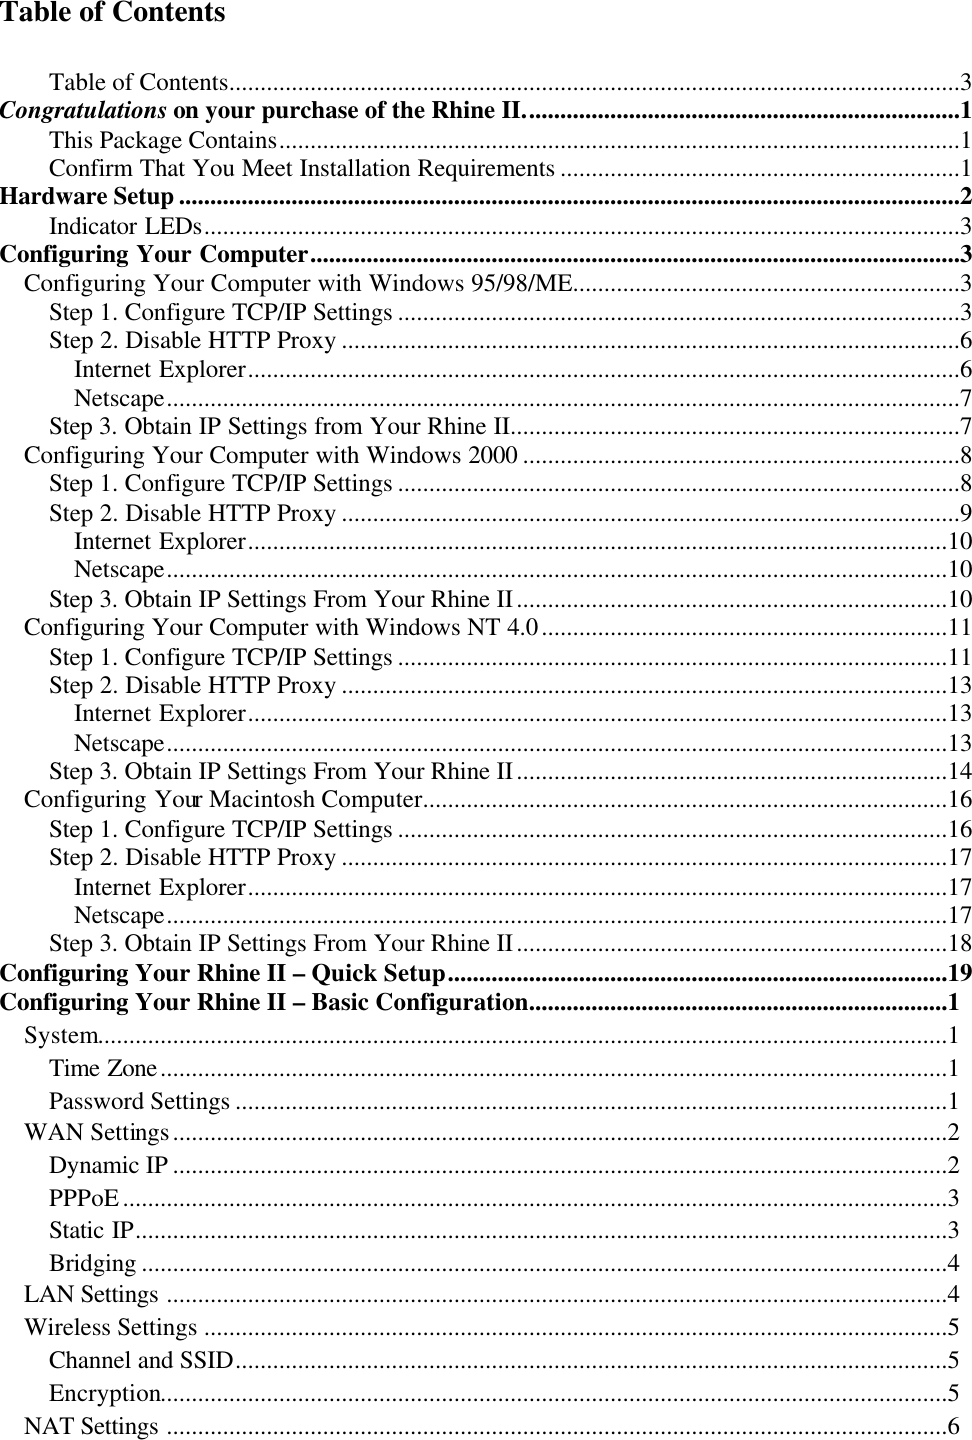   Table of Contents  Table of Contents.....................................................................................................................3 Congratulations on your purchase of the Rhine II......................................................................1 This Package Contains.............................................................................................................1 Confirm That You Meet Installation Requirements ................................................................1 Hardware Setup .............................................................................................................................2 Indicator LEDs.........................................................................................................................3 Configuring Your Computer........................................................................................................3 Configuring Your Computer with Windows 95/98/ME..............................................................3 Step 1. Configure TCP/IP Settings ..........................................................................................3 Step 2. Disable HTTP Proxy ...................................................................................................6 Internet Explorer..................................................................................................................6 Netscape...............................................................................................................................7 Step 3. Obtain IP Settings from Your Rhine II........................................................................7 Configuring Your Computer with Windows 2000 ......................................................................8 Step 1. Configure TCP/IP Settings ..........................................................................................8 Step 2. Disable HTTP Proxy ...................................................................................................9 Internet Explorer................................................................................................................10 Netscape.............................................................................................................................10 Step 3. Obtain IP Settings From Your Rhine II.....................................................................10 Configuring Your Computer with Windows NT 4.0.................................................................11 Step 1. Configure TCP/IP Settings ........................................................................................11 Step 2. Disable HTTP Proxy .................................................................................................13 Internet Explorer................................................................................................................13 Netscape.............................................................................................................................13 Step 3. Obtain IP Settings From Your Rhine II.....................................................................14 Configuring Your Macintosh Computer....................................................................................16 Step 1. Configure TCP/IP Settings ........................................................................................16 Step 2. Disable HTTP Proxy .................................................................................................17 Internet Explorer................................................................................................................17 Netscape.............................................................................................................................17 Step 3. Obtain IP Settings From Your Rhine II.....................................................................18 Configuring Your Rhine II – Quick Setup................................................................................19 Configuring Your Rhine II – Basic Configuration...................................................................1System........................................................................................................................................1Time Zone..............................................................................................................................1Password Settings ..................................................................................................................1WAN Settings............................................................................................................................2Dynamic IP ............................................................................................................................2PPPoE....................................................................................................................................3Static IP..................................................................................................................................3Bridging .................................................................................................................................4LAN Settings .............................................................................................................................4Wireless Settings .......................................................................................................................5Channel and SSID..................................................................................................................5 Encryption..............................................................................................................................5NAT Settings .............................................................................................................................6